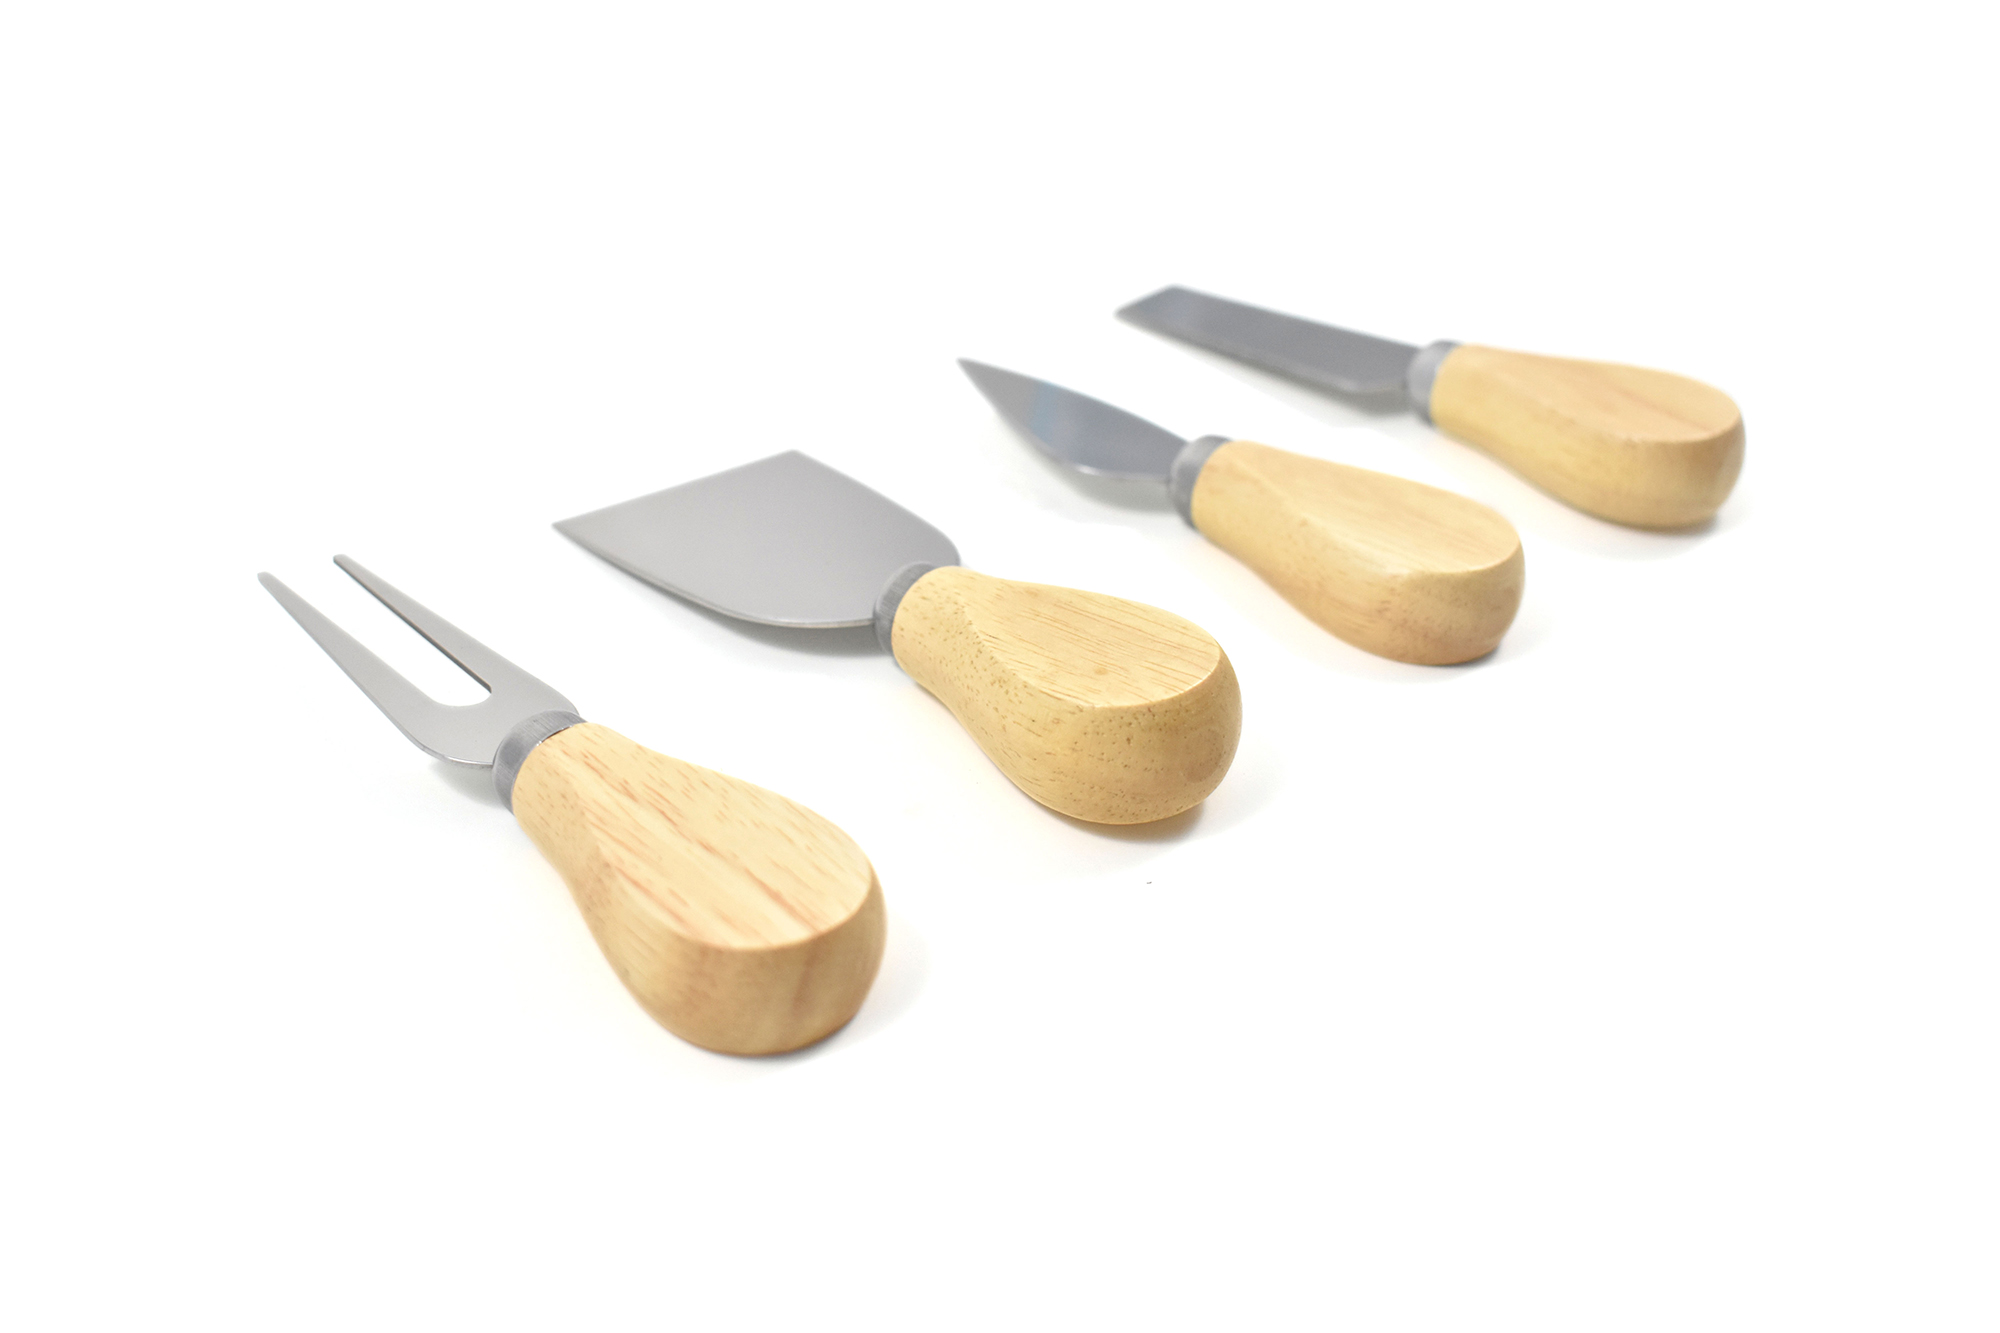 Chesse knives